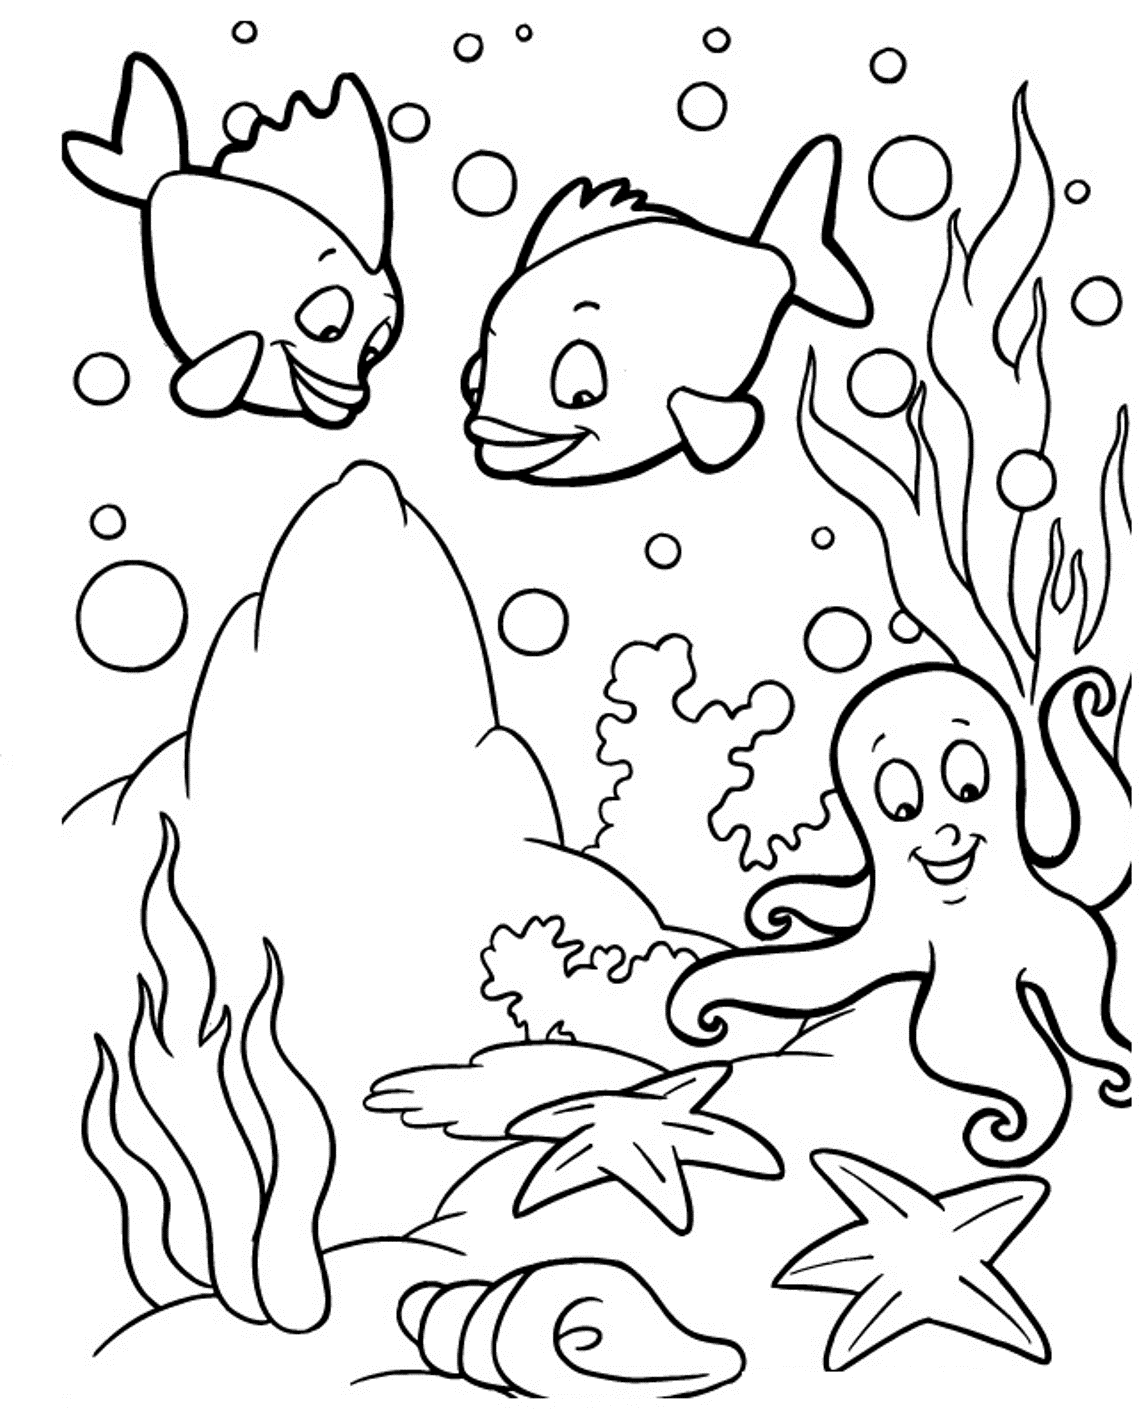 Of Sea Animals   Coloring Pages For Kids And For Adults   Coloring ...